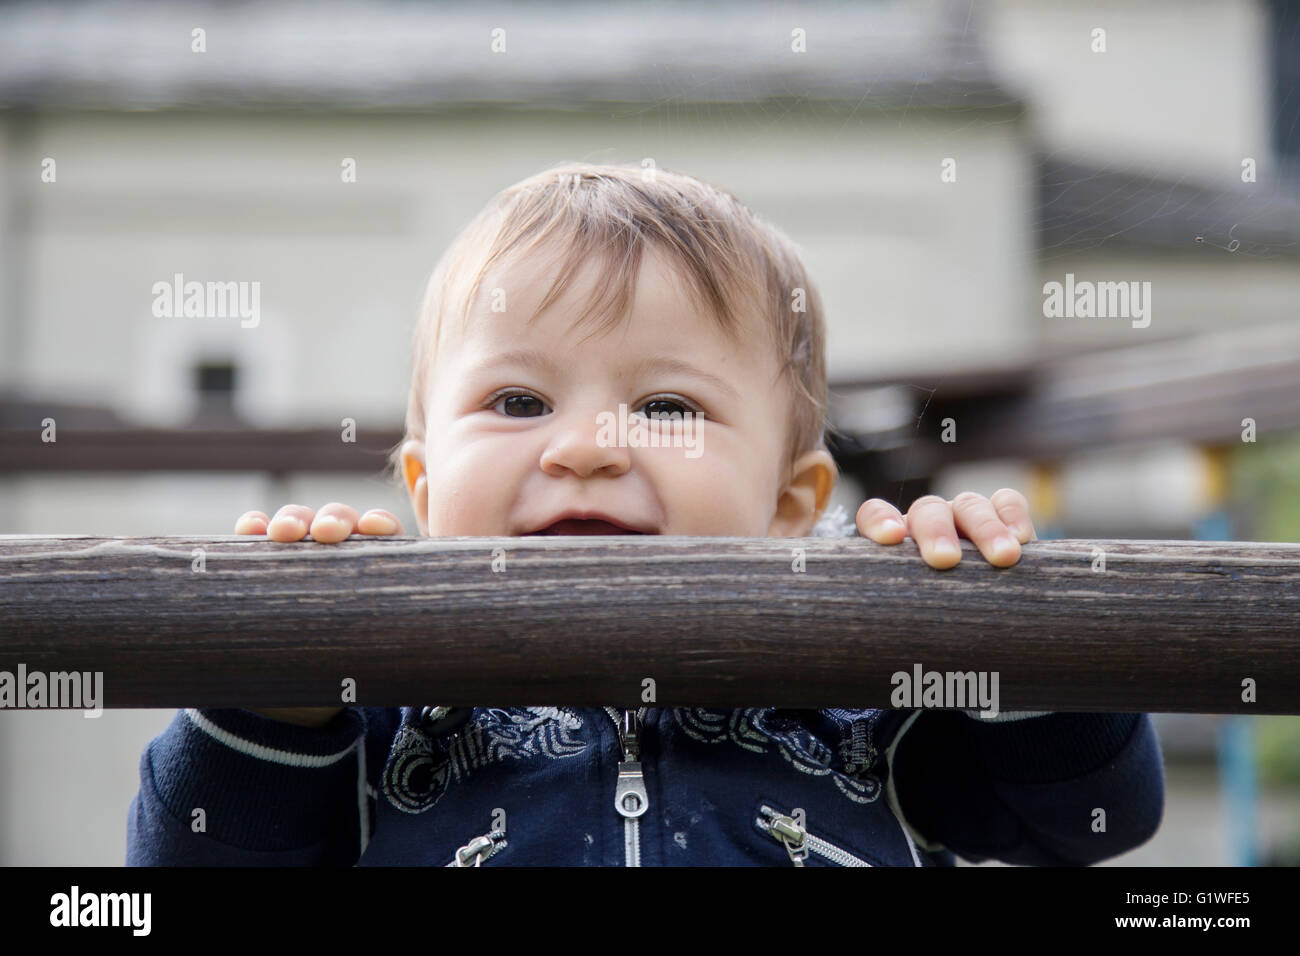 Portrait of smiling one year old kid hanging on wooden bar and looking at camera Stock Photo